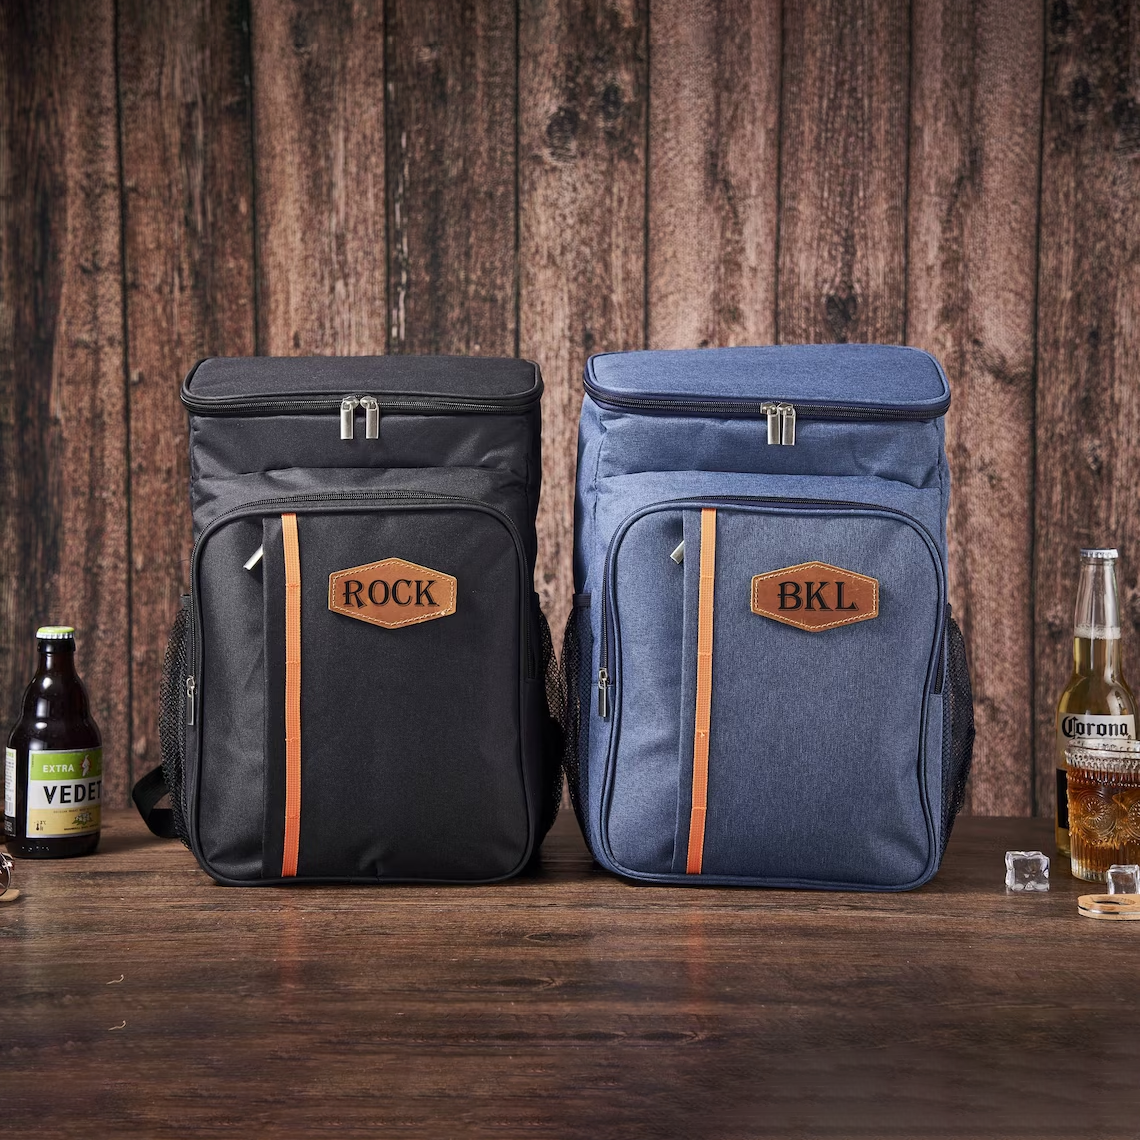 Personalized Insulated Cooler Bag